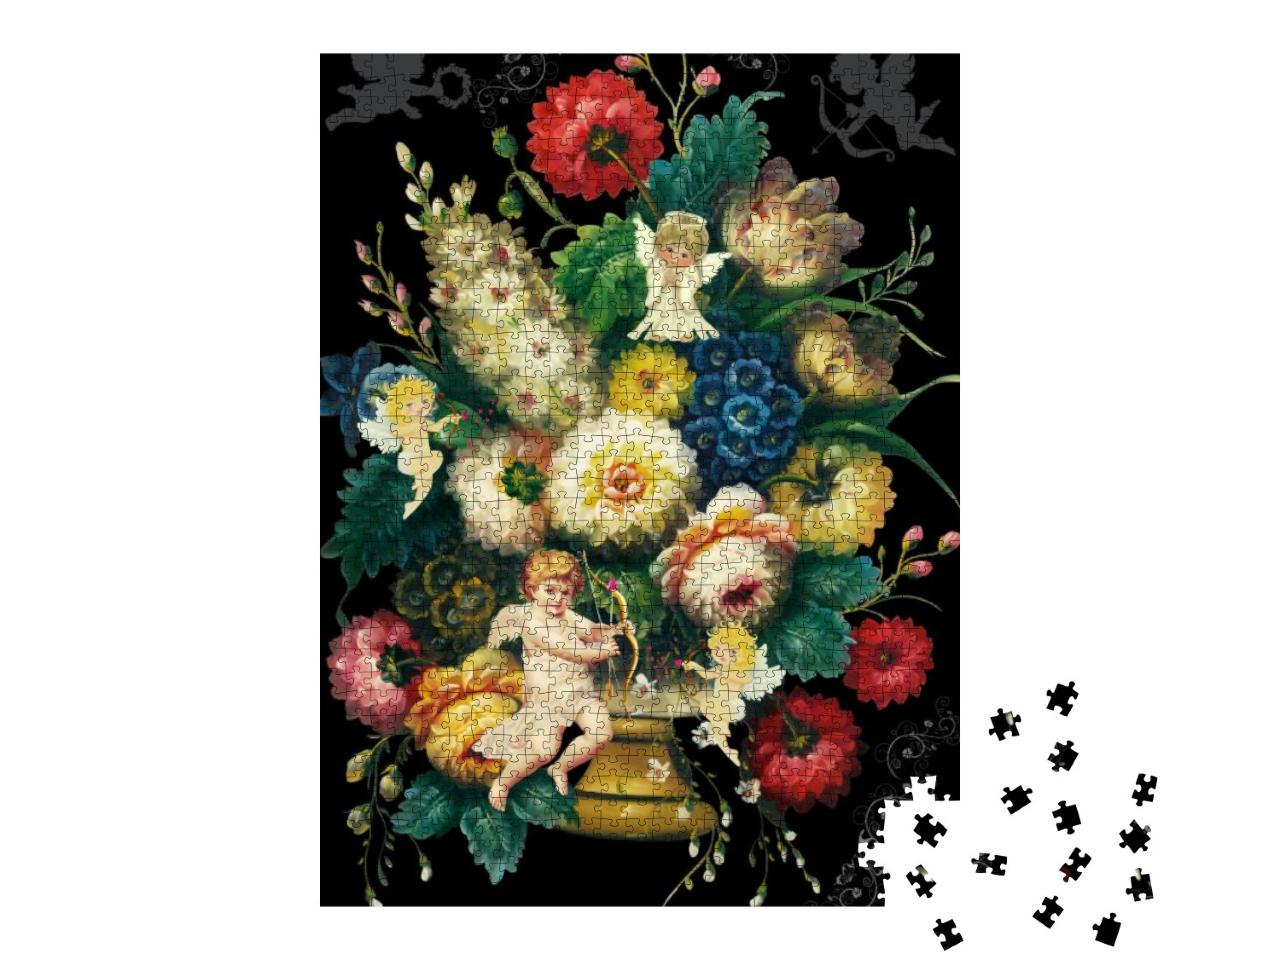 High Resolution Vintage Flowers & Birds. Angels, Roses, R... Jigsaw Puzzle with 1000 pieces